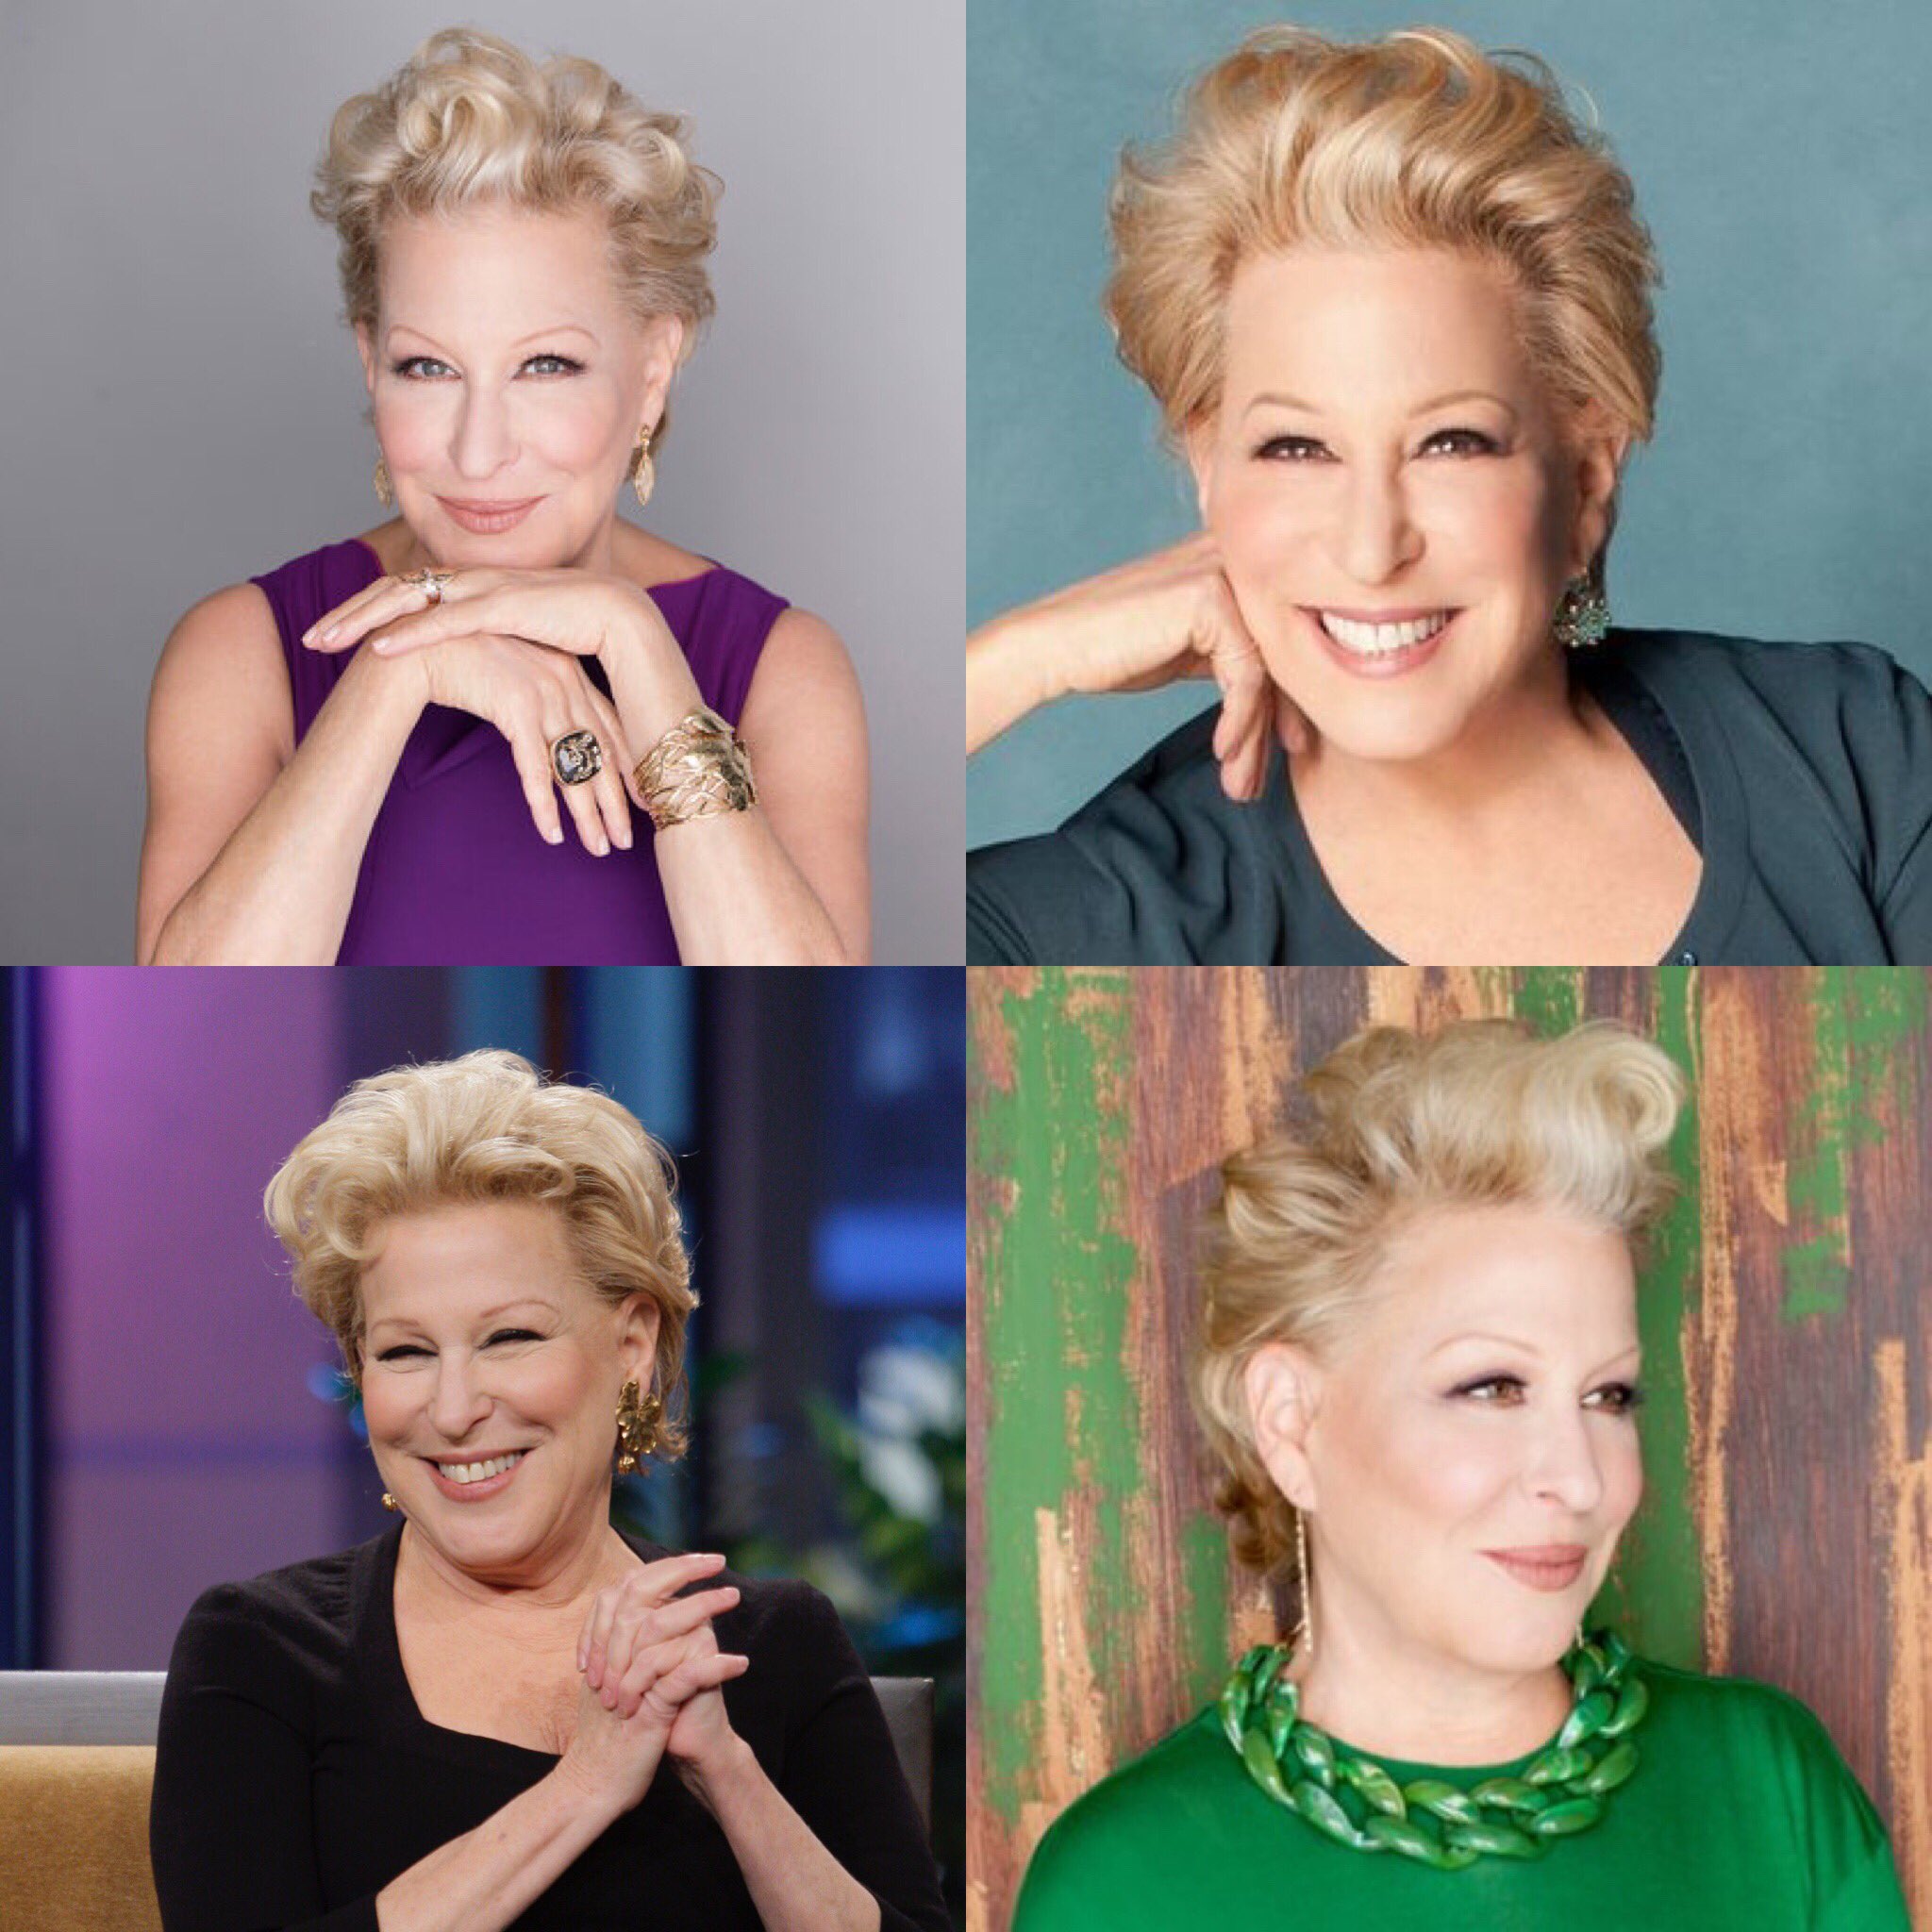 Happy 73 Birthday To Bette Midler . Hope that she has a wonderful birthday.       